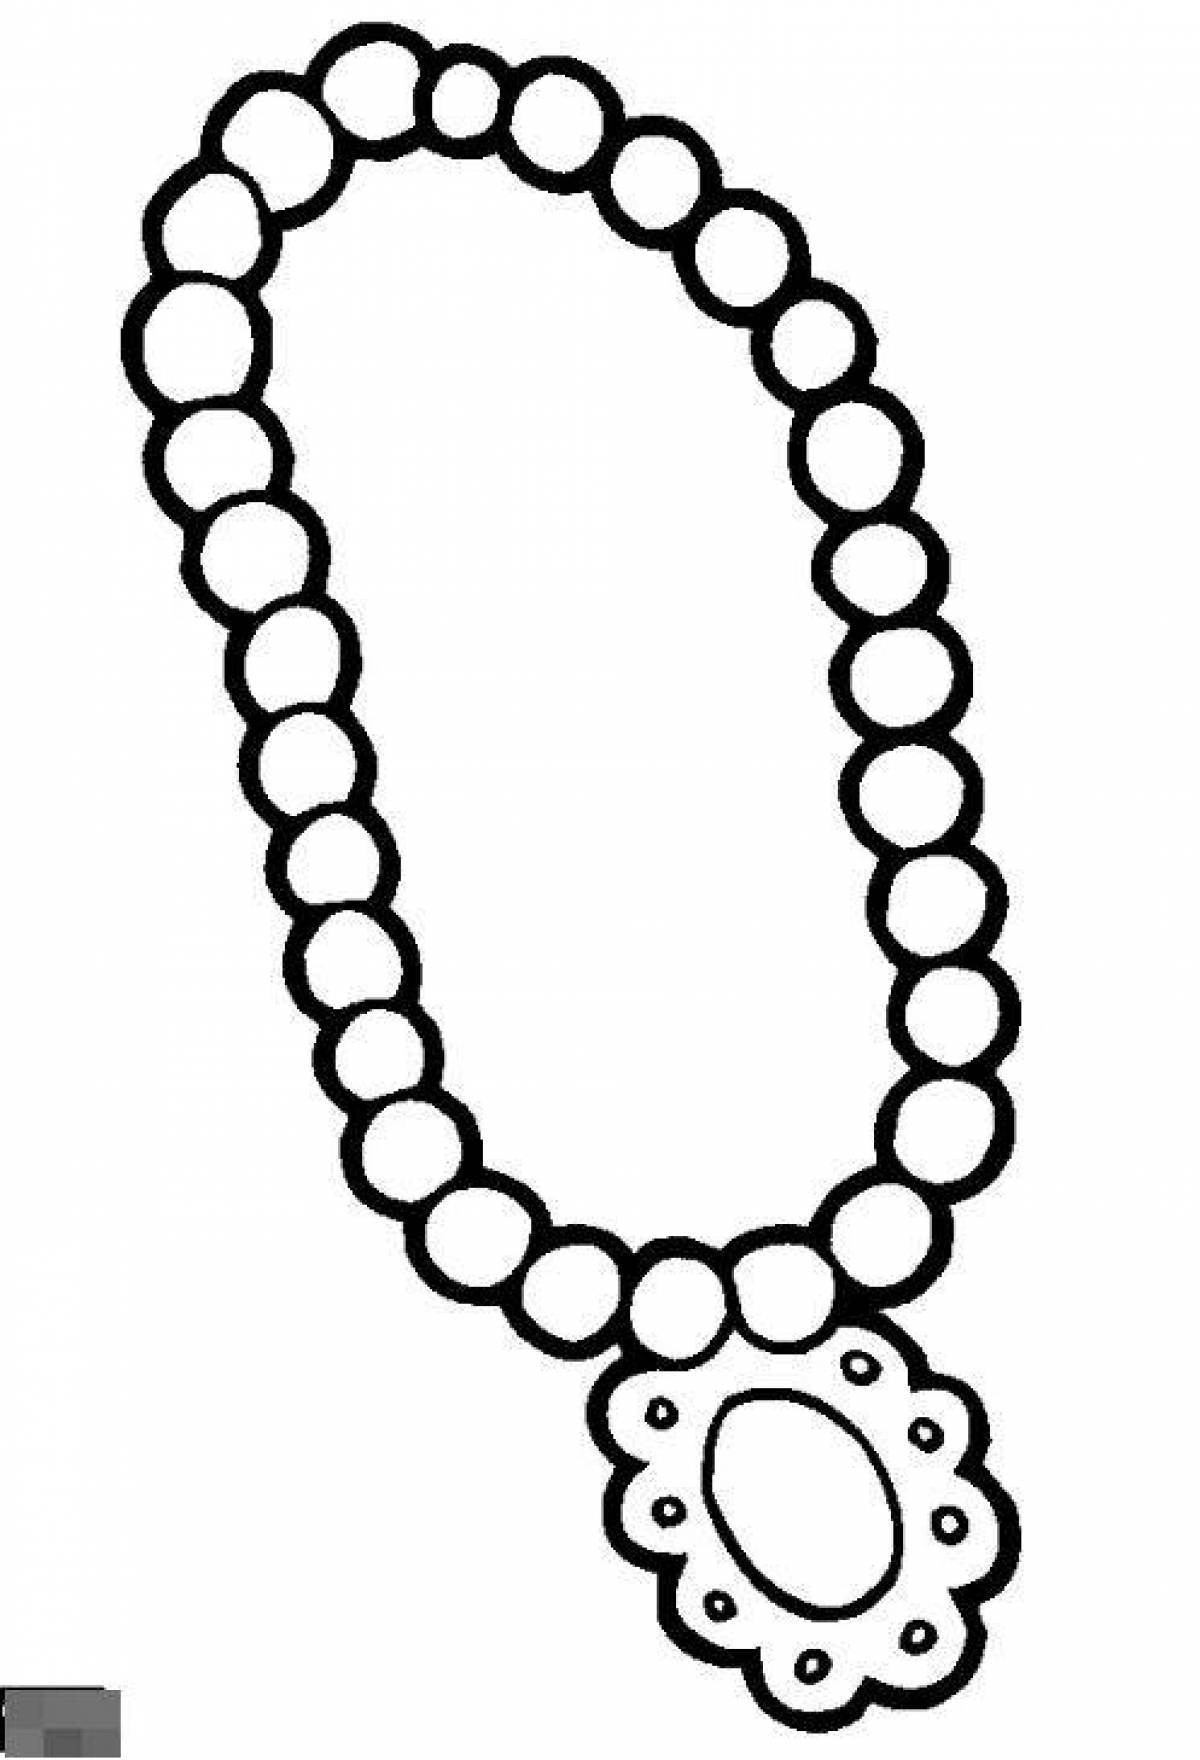 Coloring Page of a Spectacular Necklace